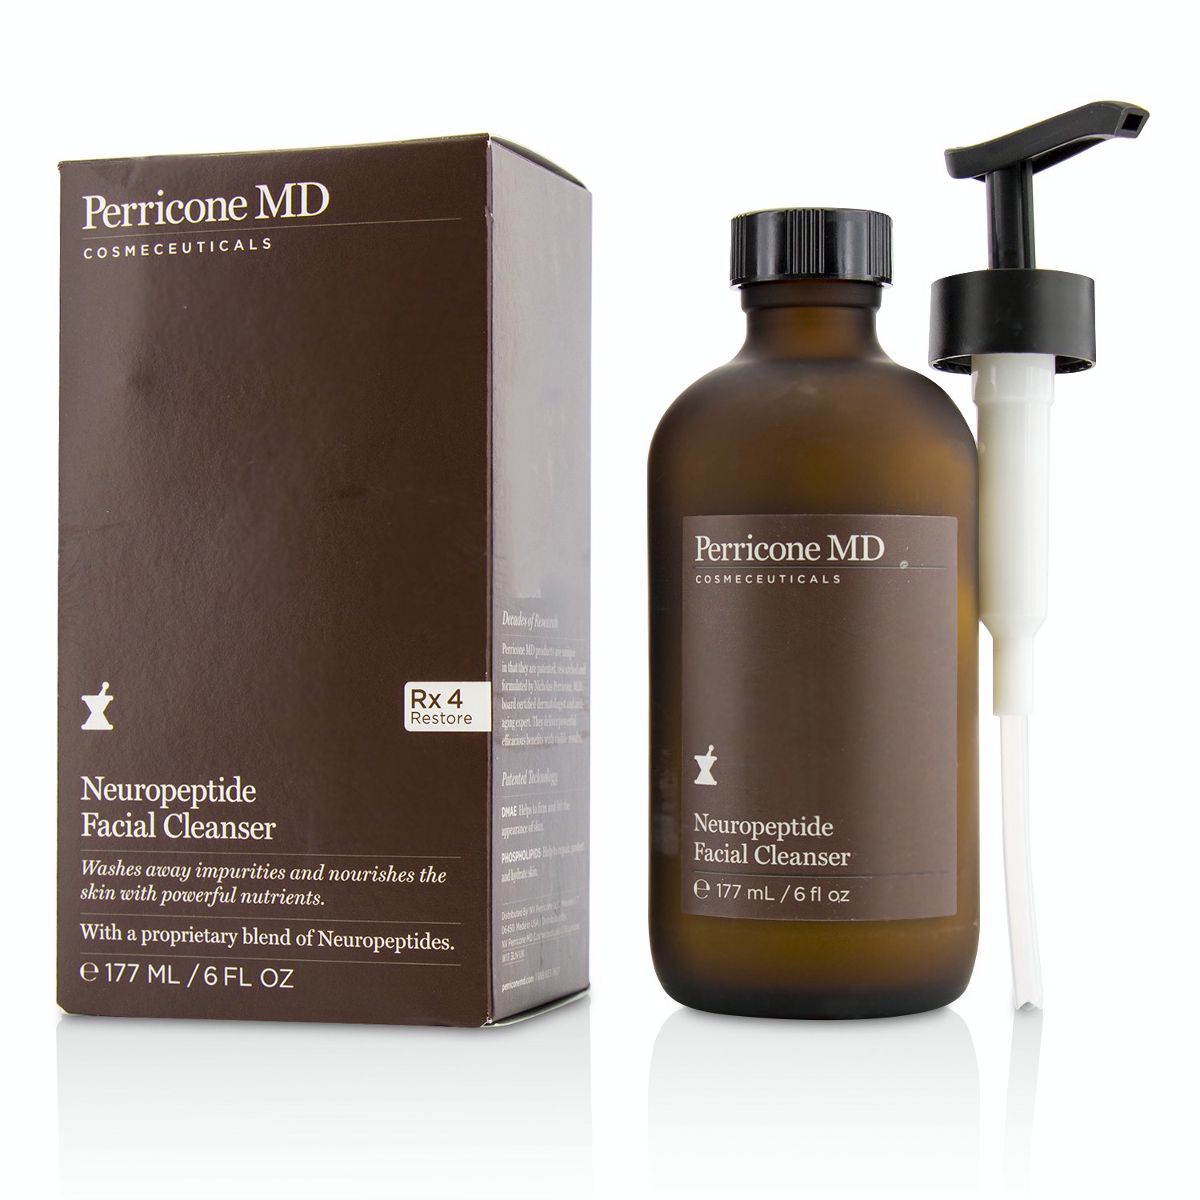 Neuropeptide Facial Cleanser Perricone MD Image